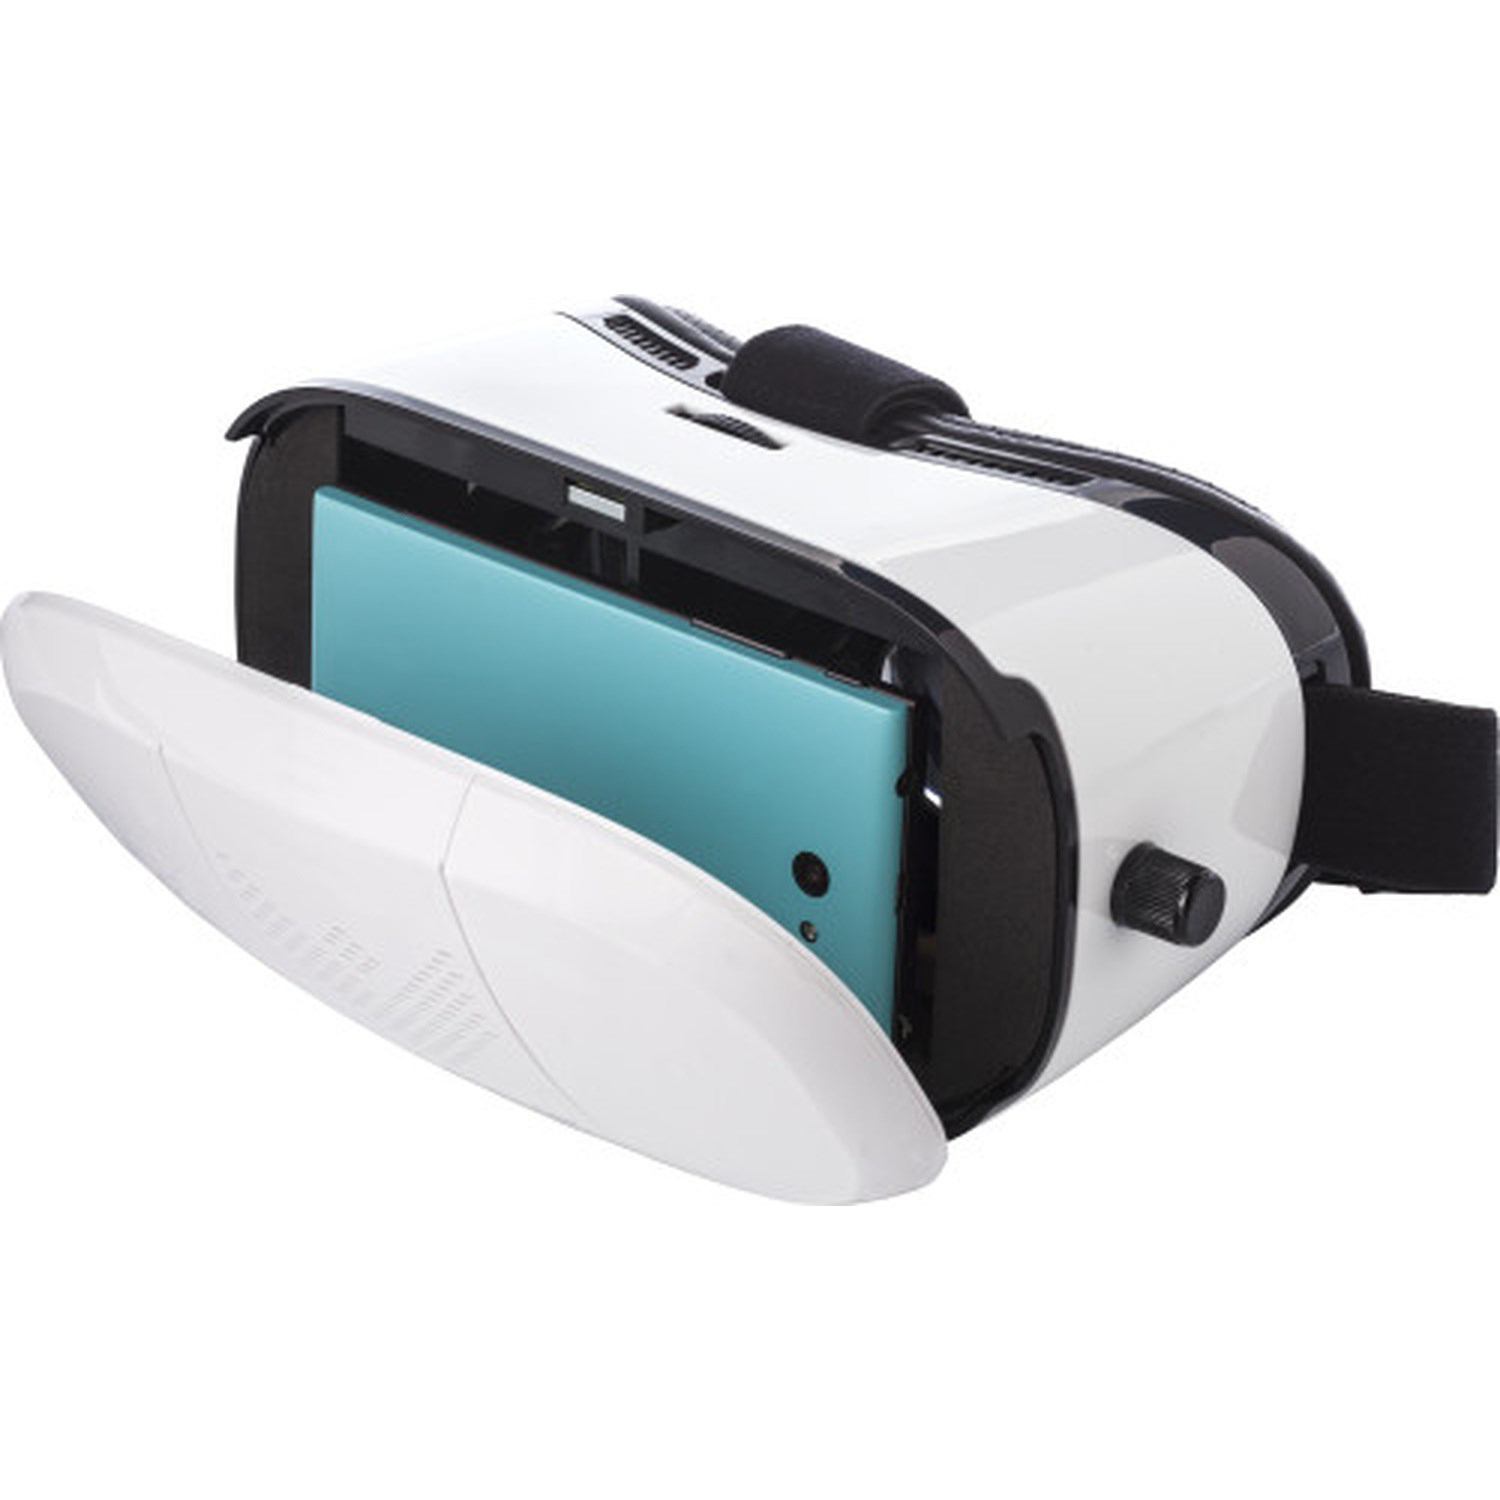 VR headset in white showing where you insert the phone